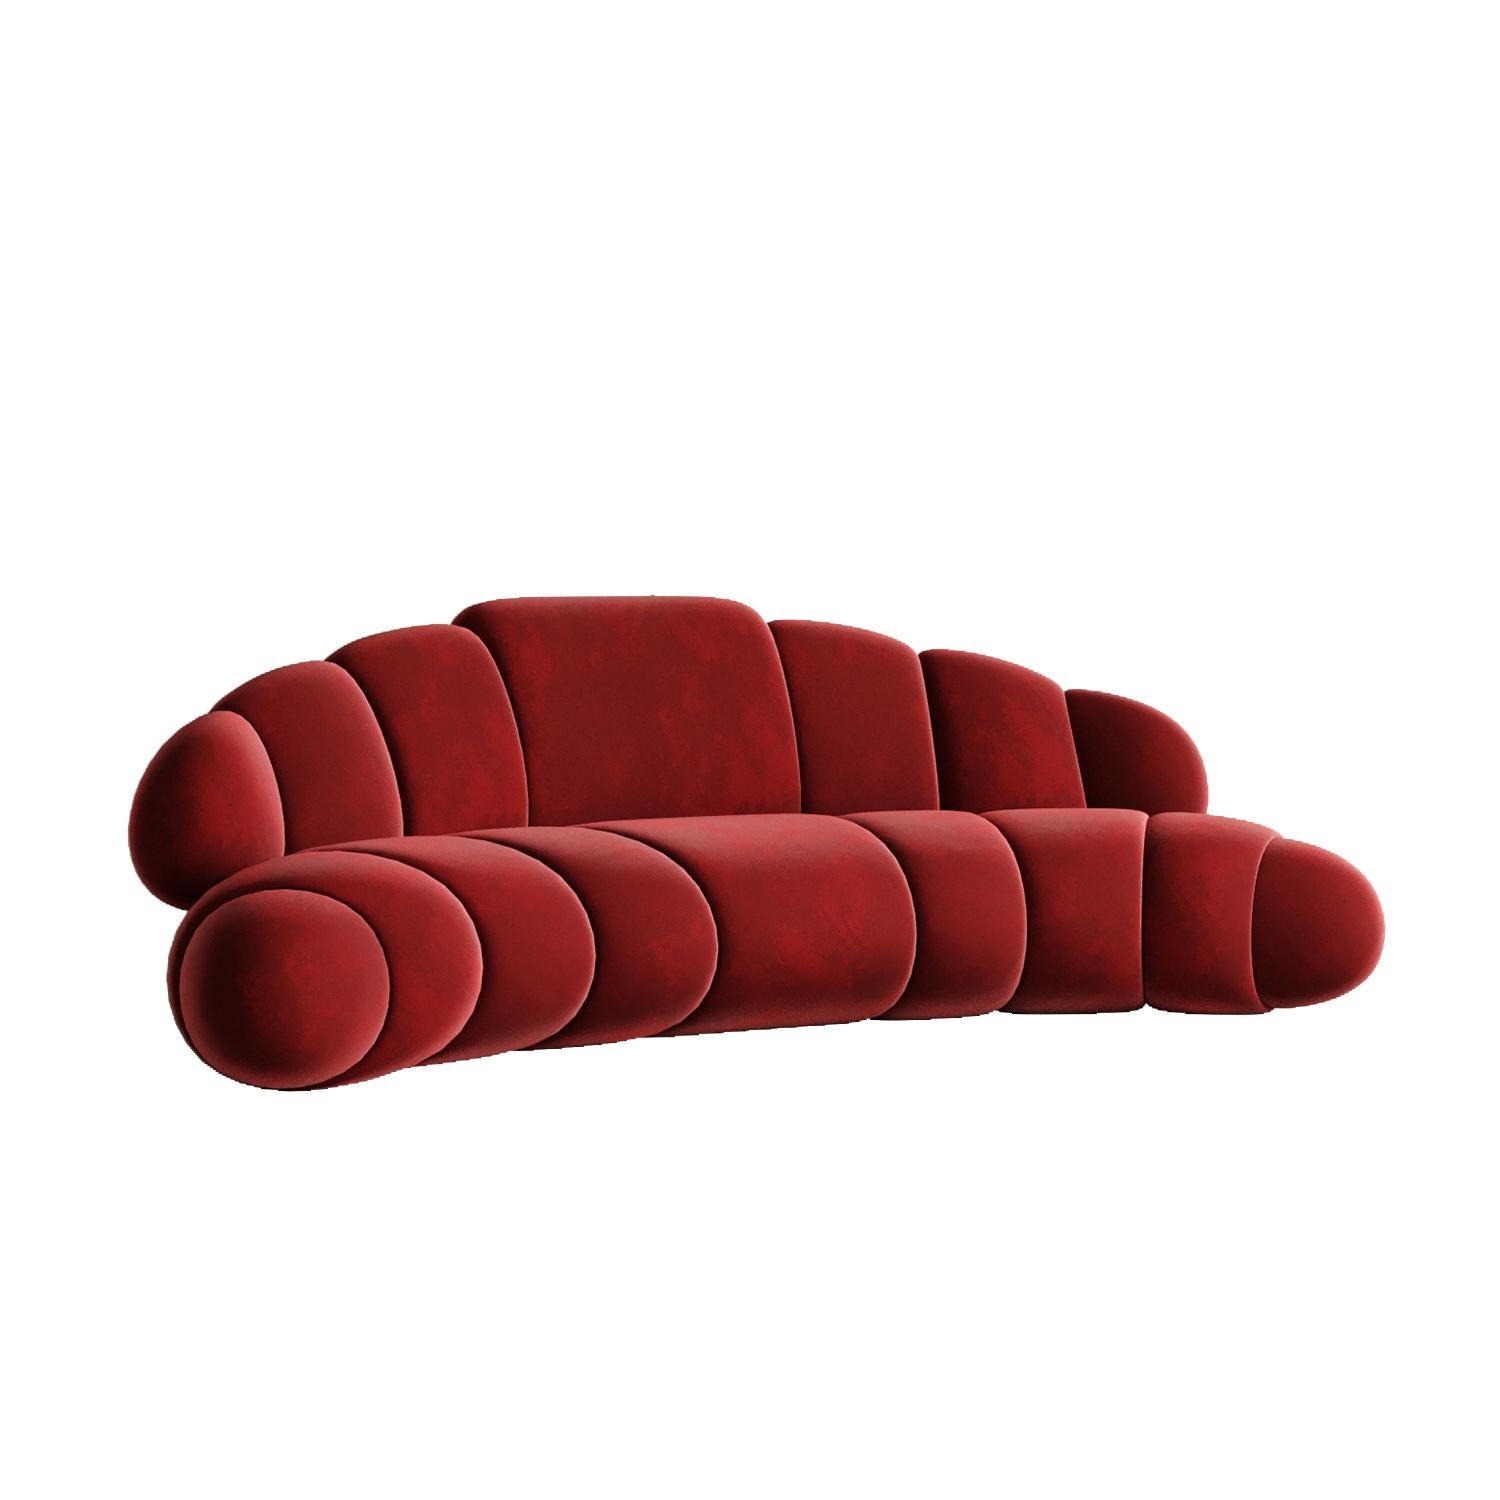 Cayenne Croissant Sofa by Plyus Design
Dimensions: D 120 x W 240 x H 80 cm
Materials:  Wood, HR foam, polyester wadding, fabric upholstery.

“Croissant” Sofa.
Of course, for the dessert we have all the most delicious and favorite pieces. Collection